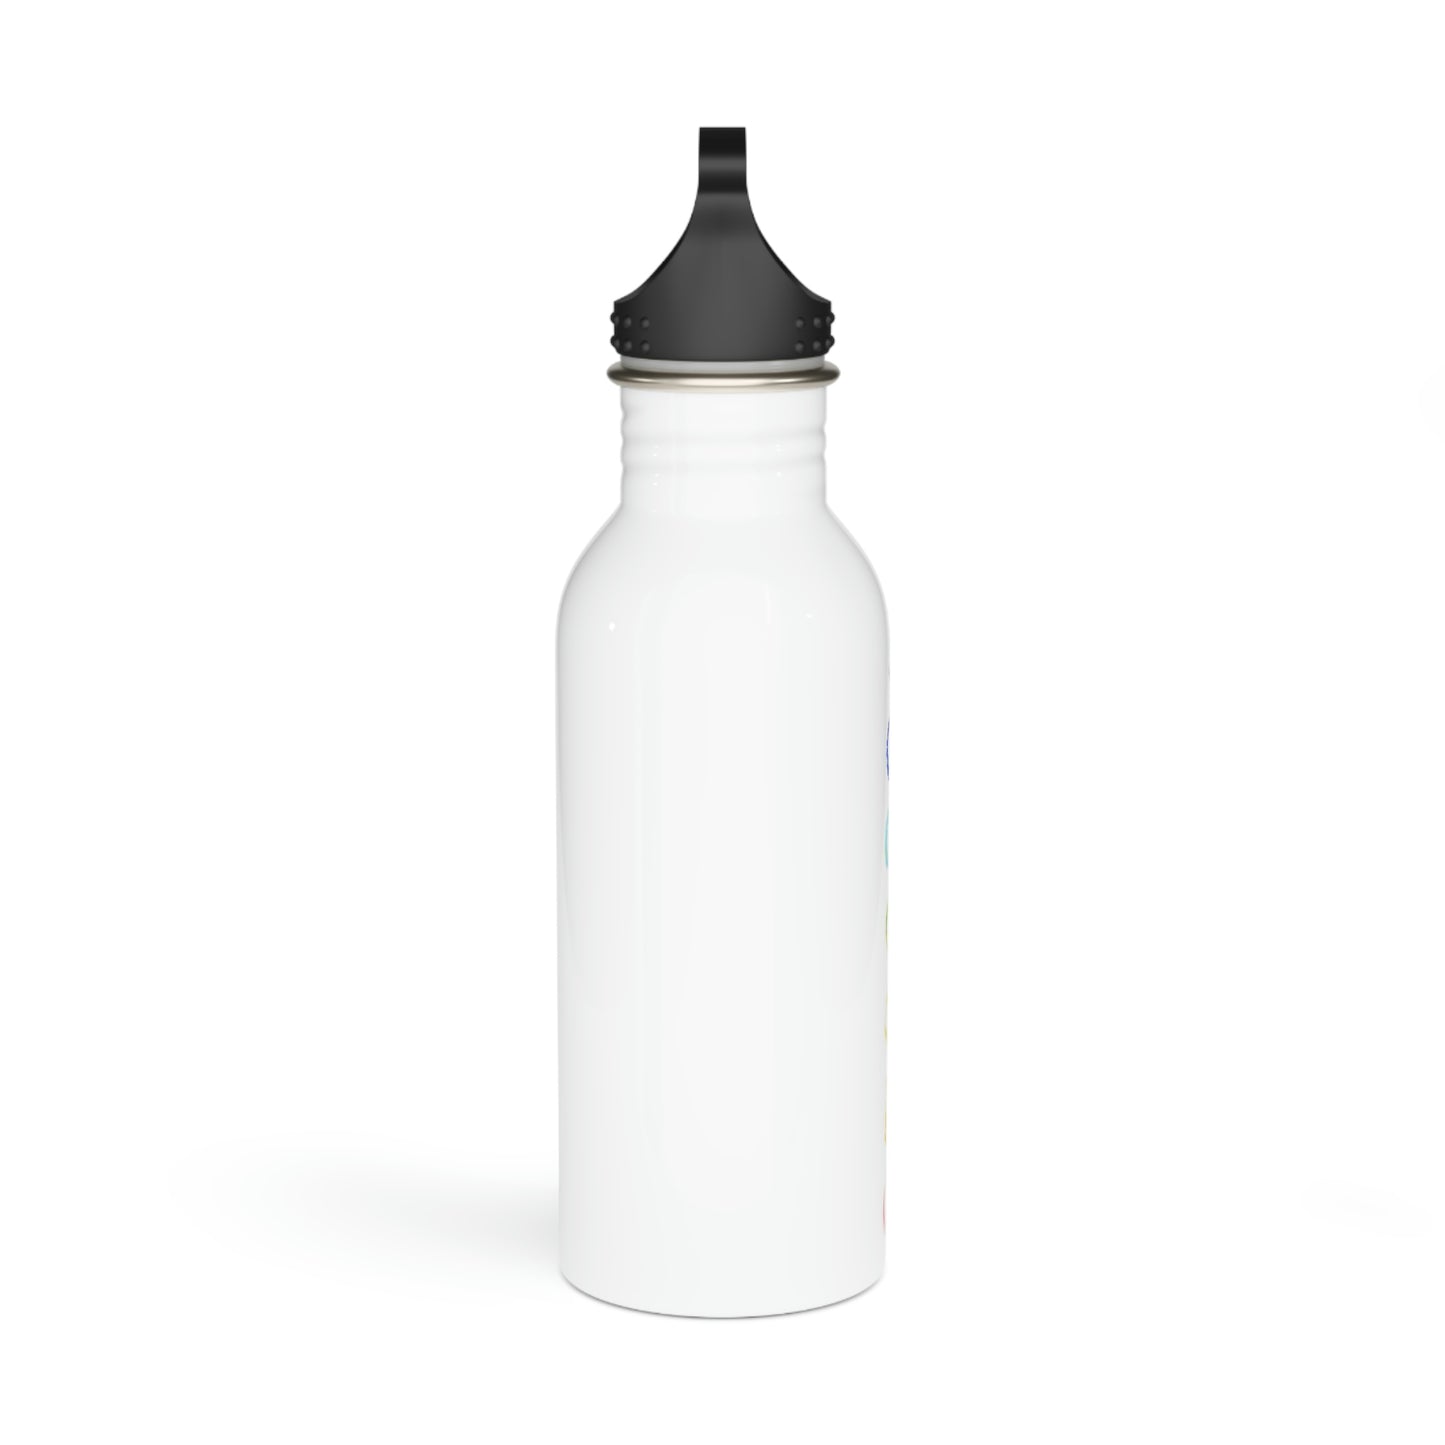 Stainless Steel Water Bottle - Chakras Collection